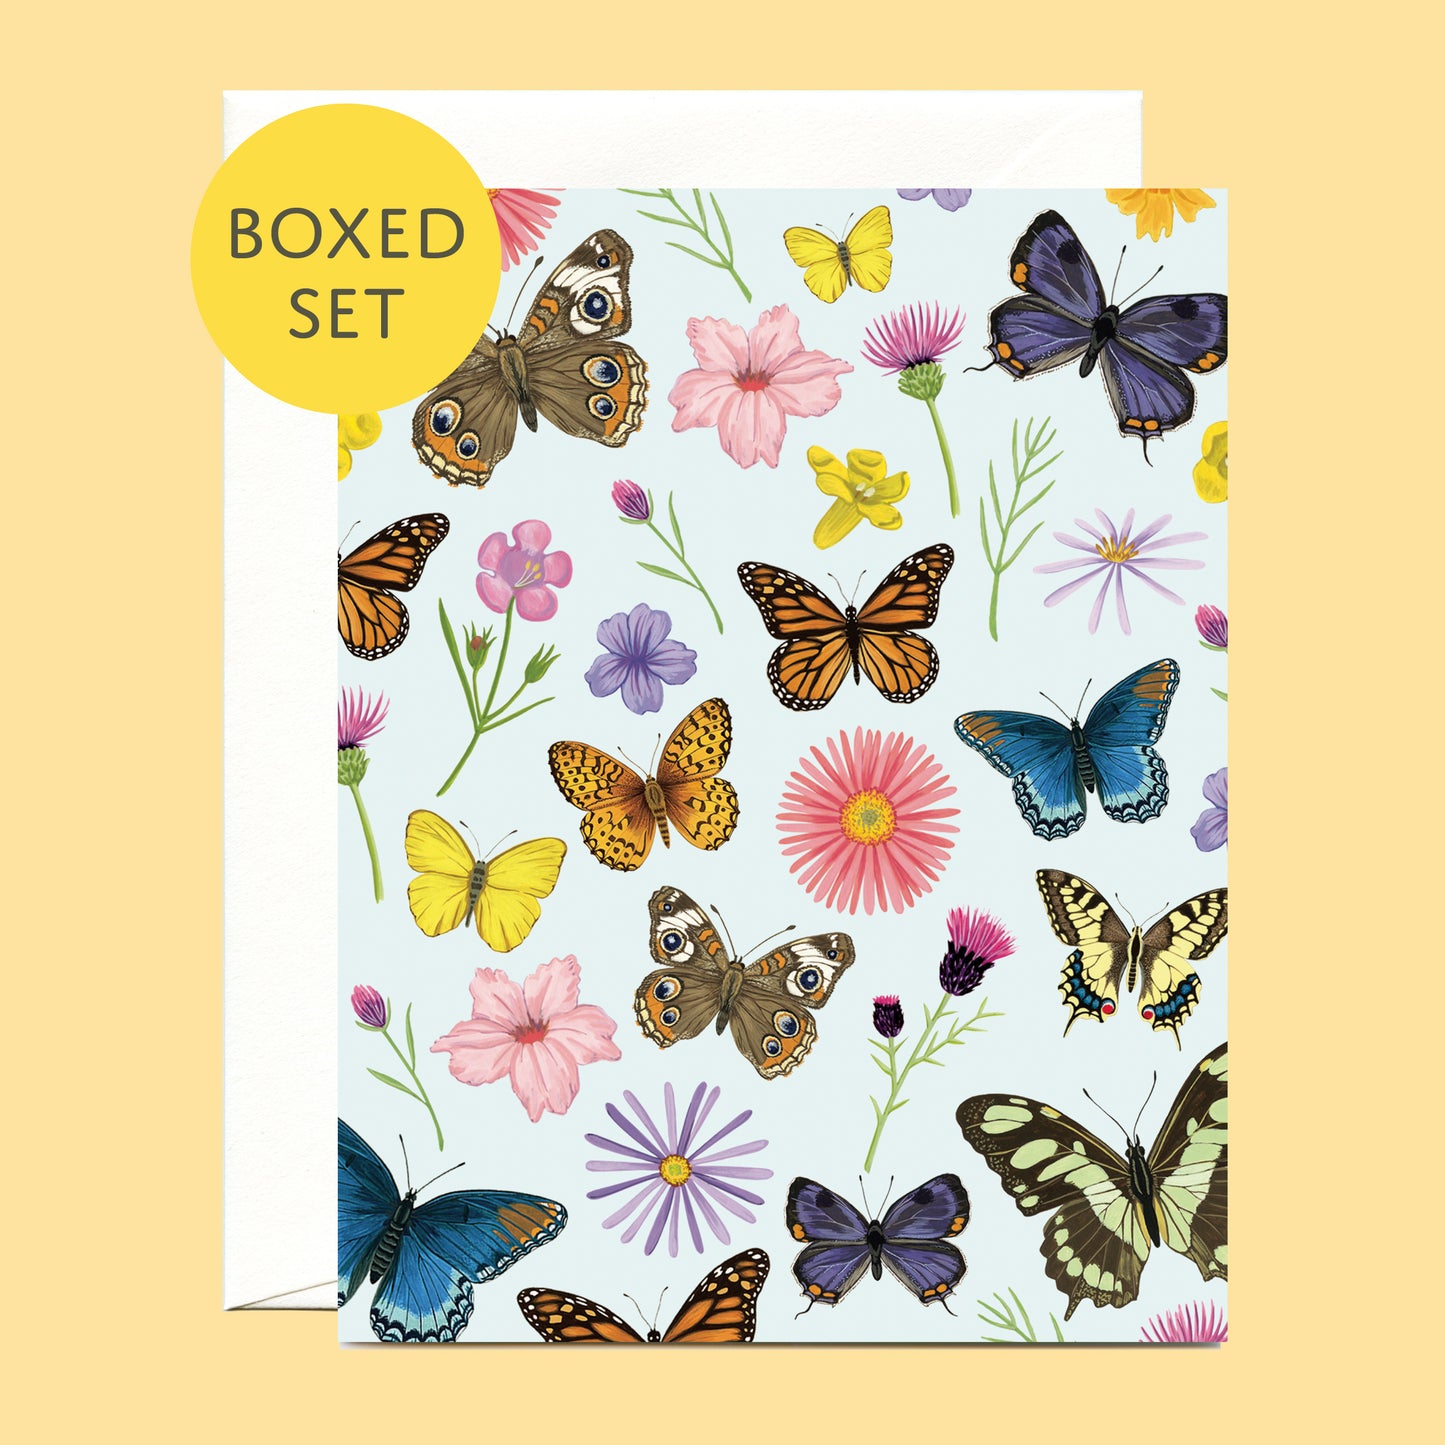 EVERYDAY BUTTERFLIES AND FLOWERS - BLANK GREETING CARDS, BOXED SET OF 8